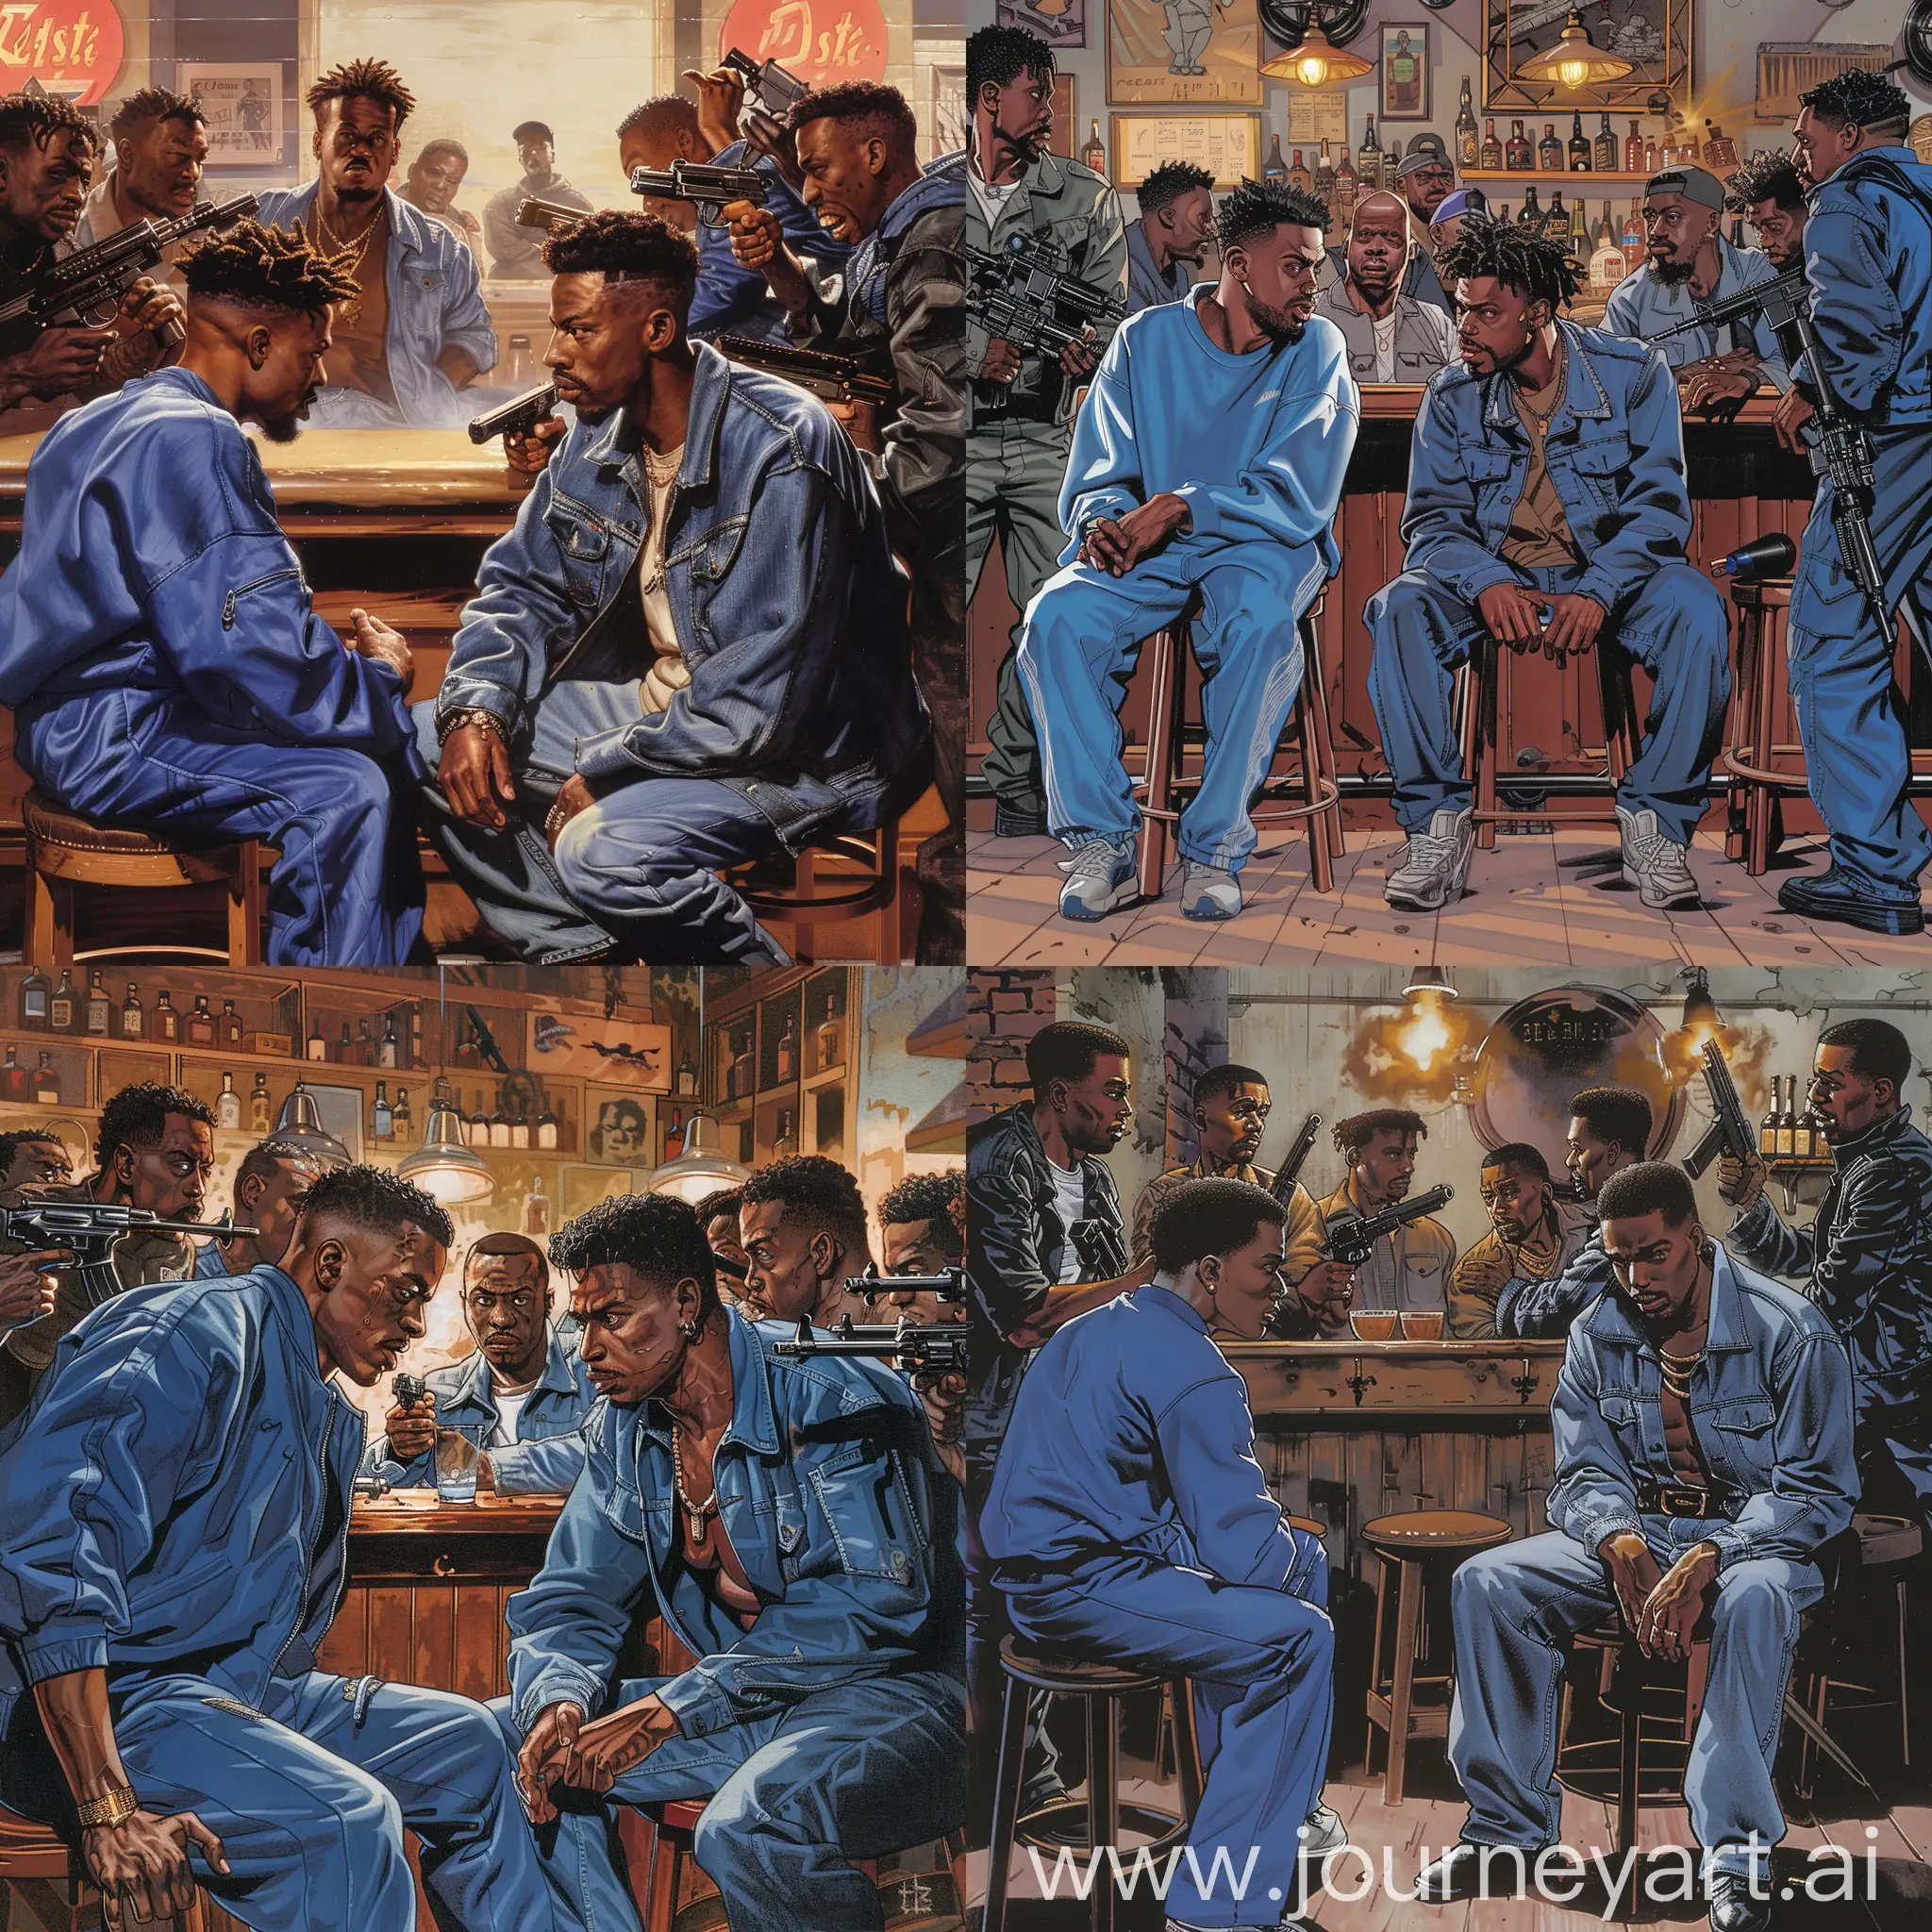 Its 1996 in a Chicago local bar. Two joung blackmen sitting at bar talking. One is lightskin wearing a blue jogging suit. The other guy is darkskin wearing a bluejean suit .The darkskin guy is surrounded by several thug looking guys all with guns pointed at the darkskin guy.